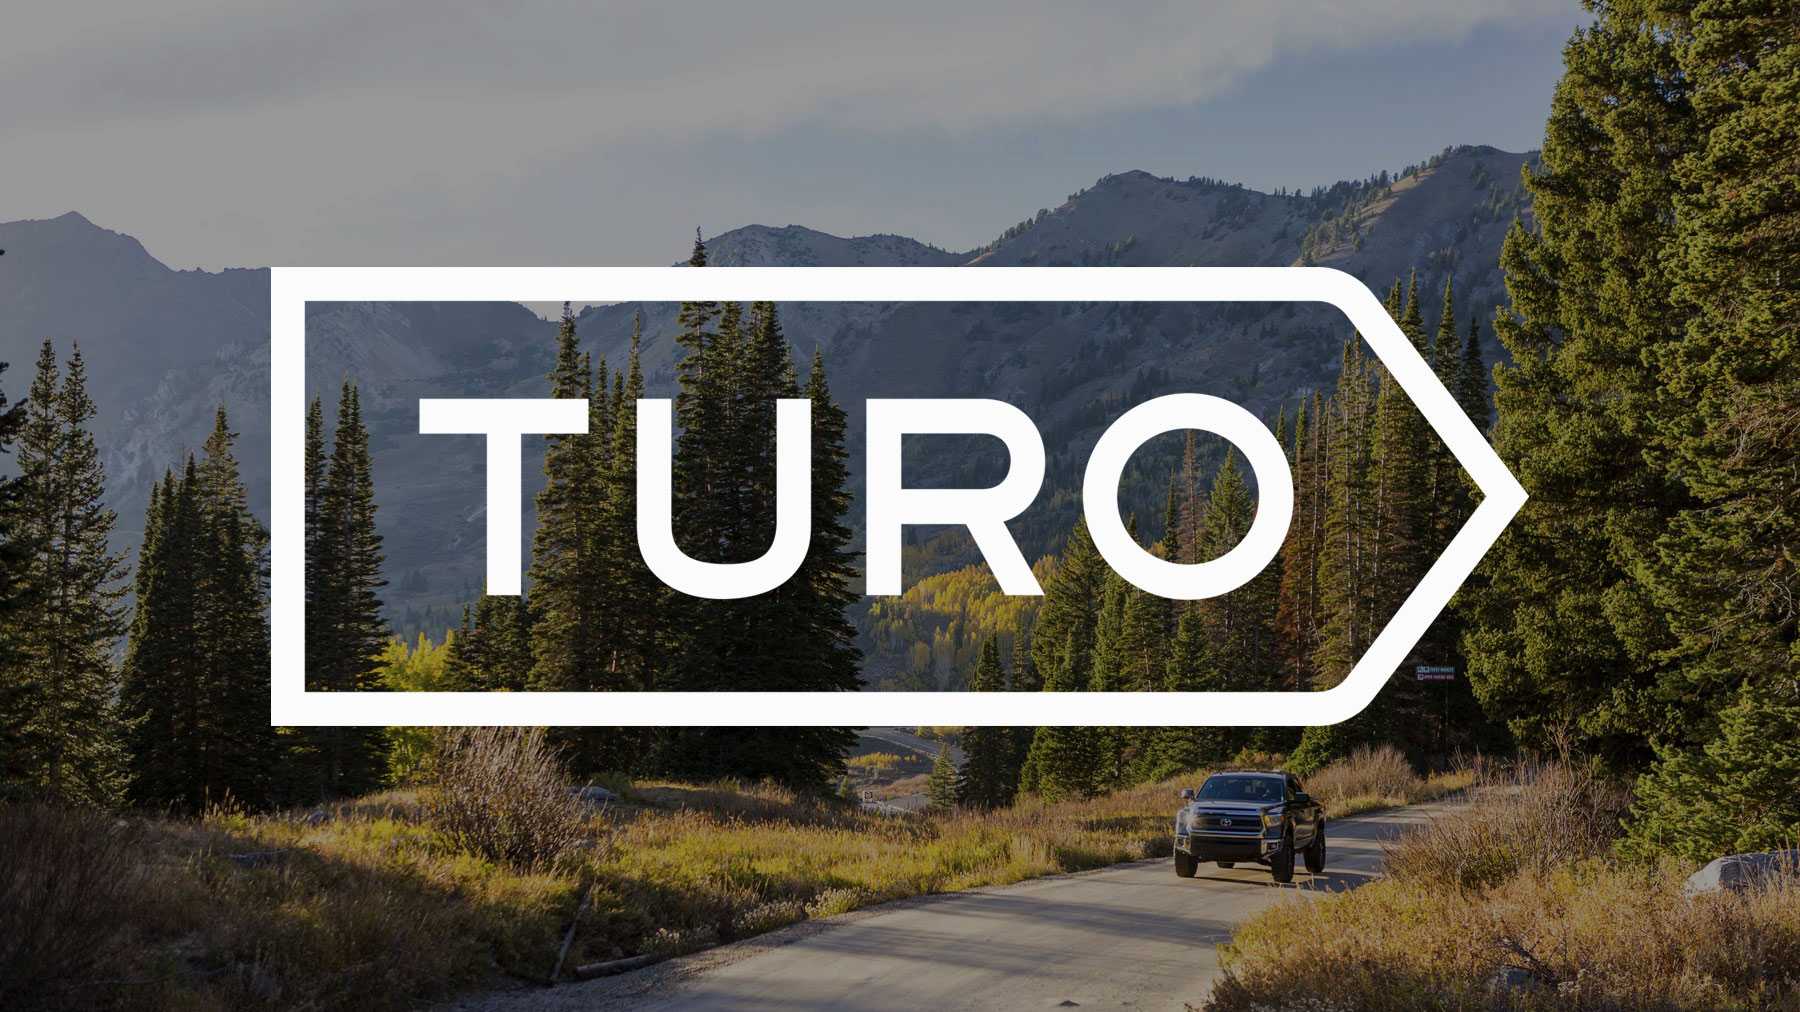 rent on turo to make $3,000 fast